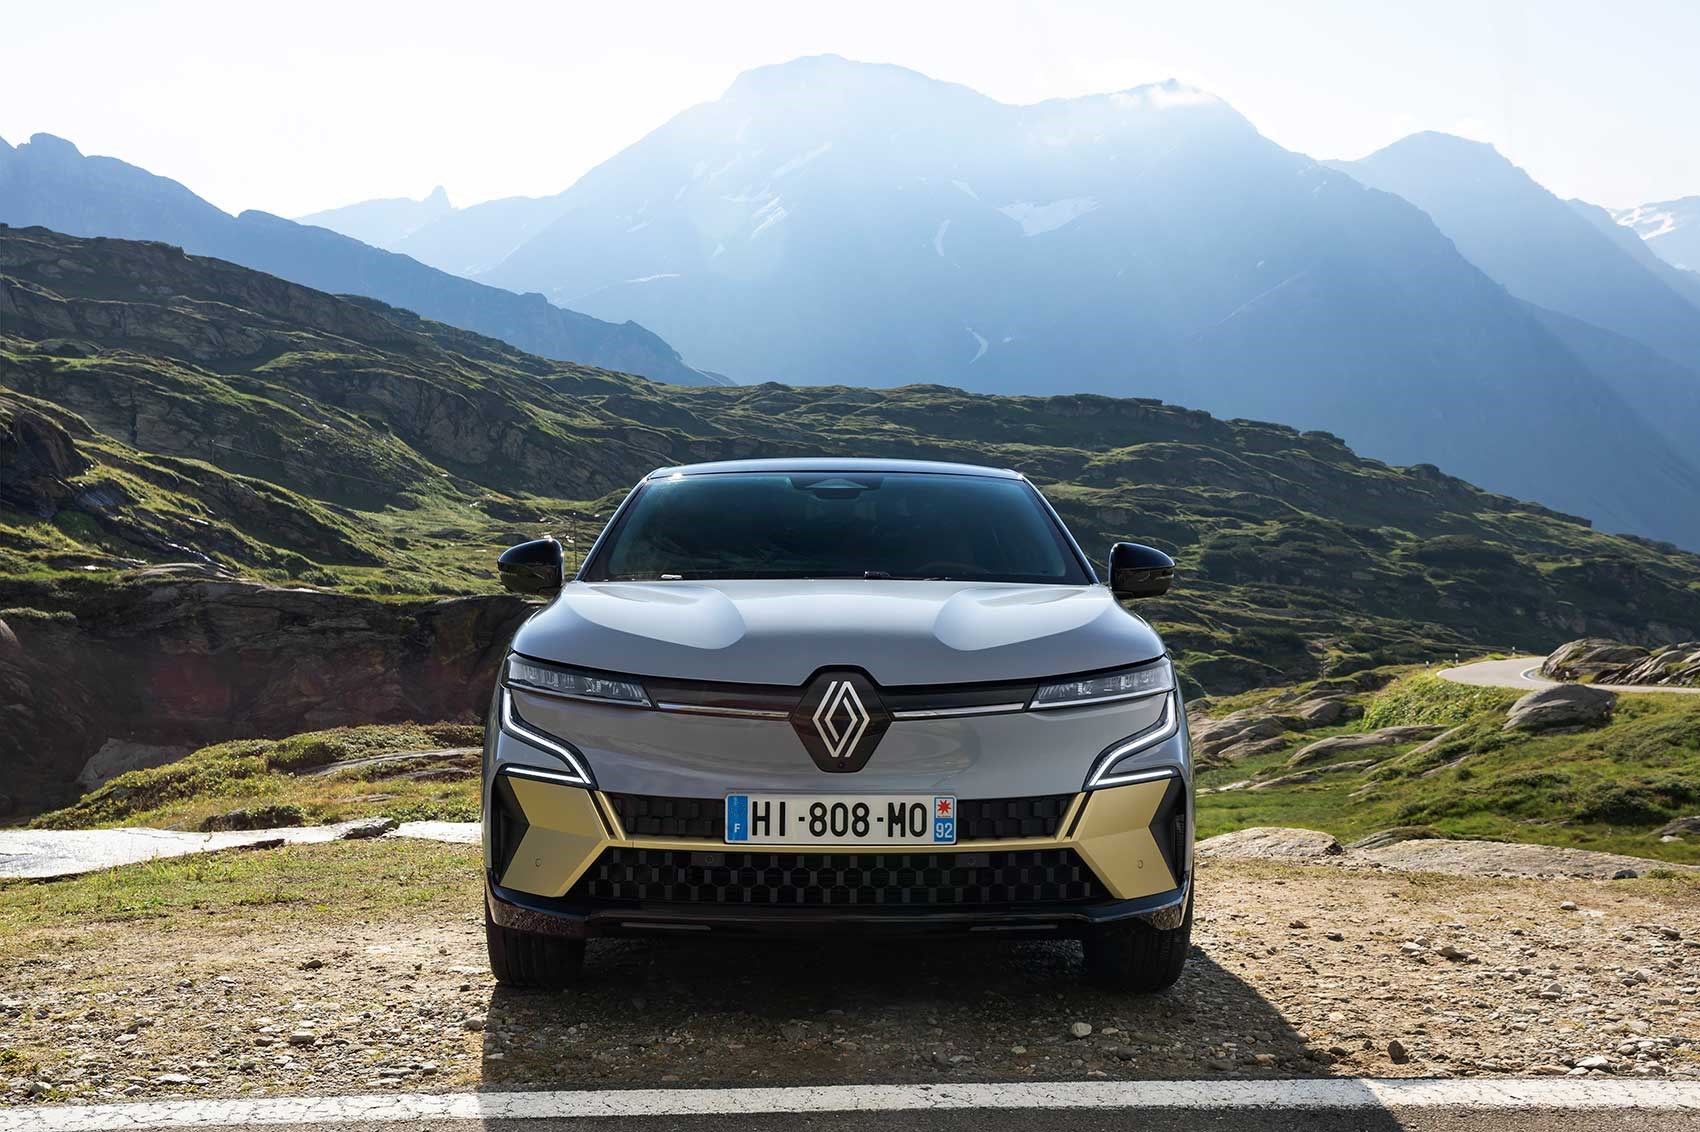 Renault Megane Electric: full details and pictures